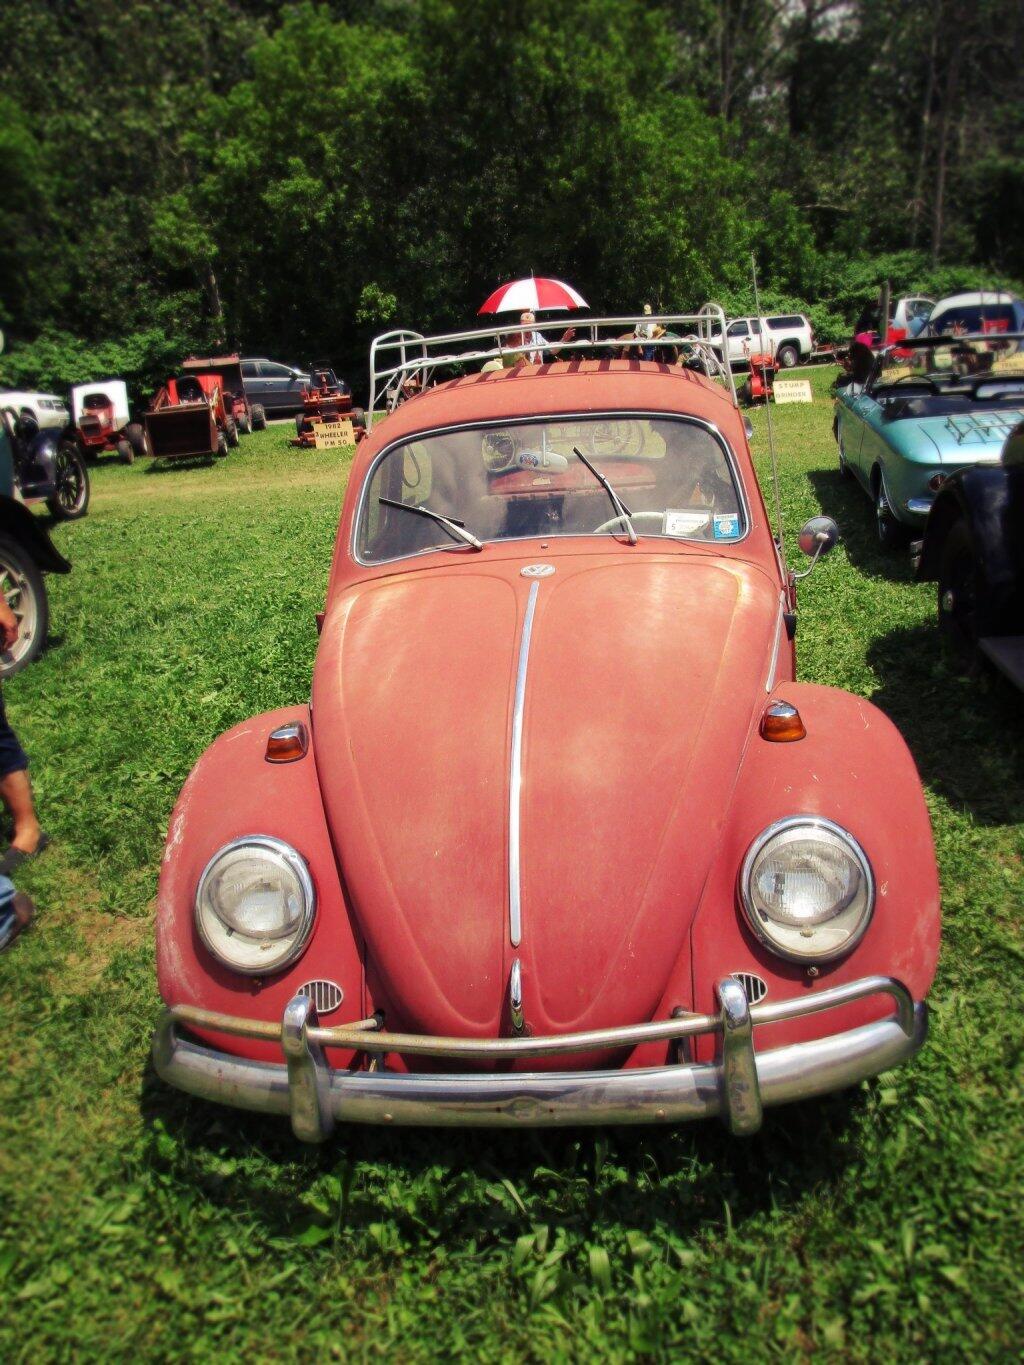  With A Face Like That, Who Couldn\'t Love A Volkswagen Bug